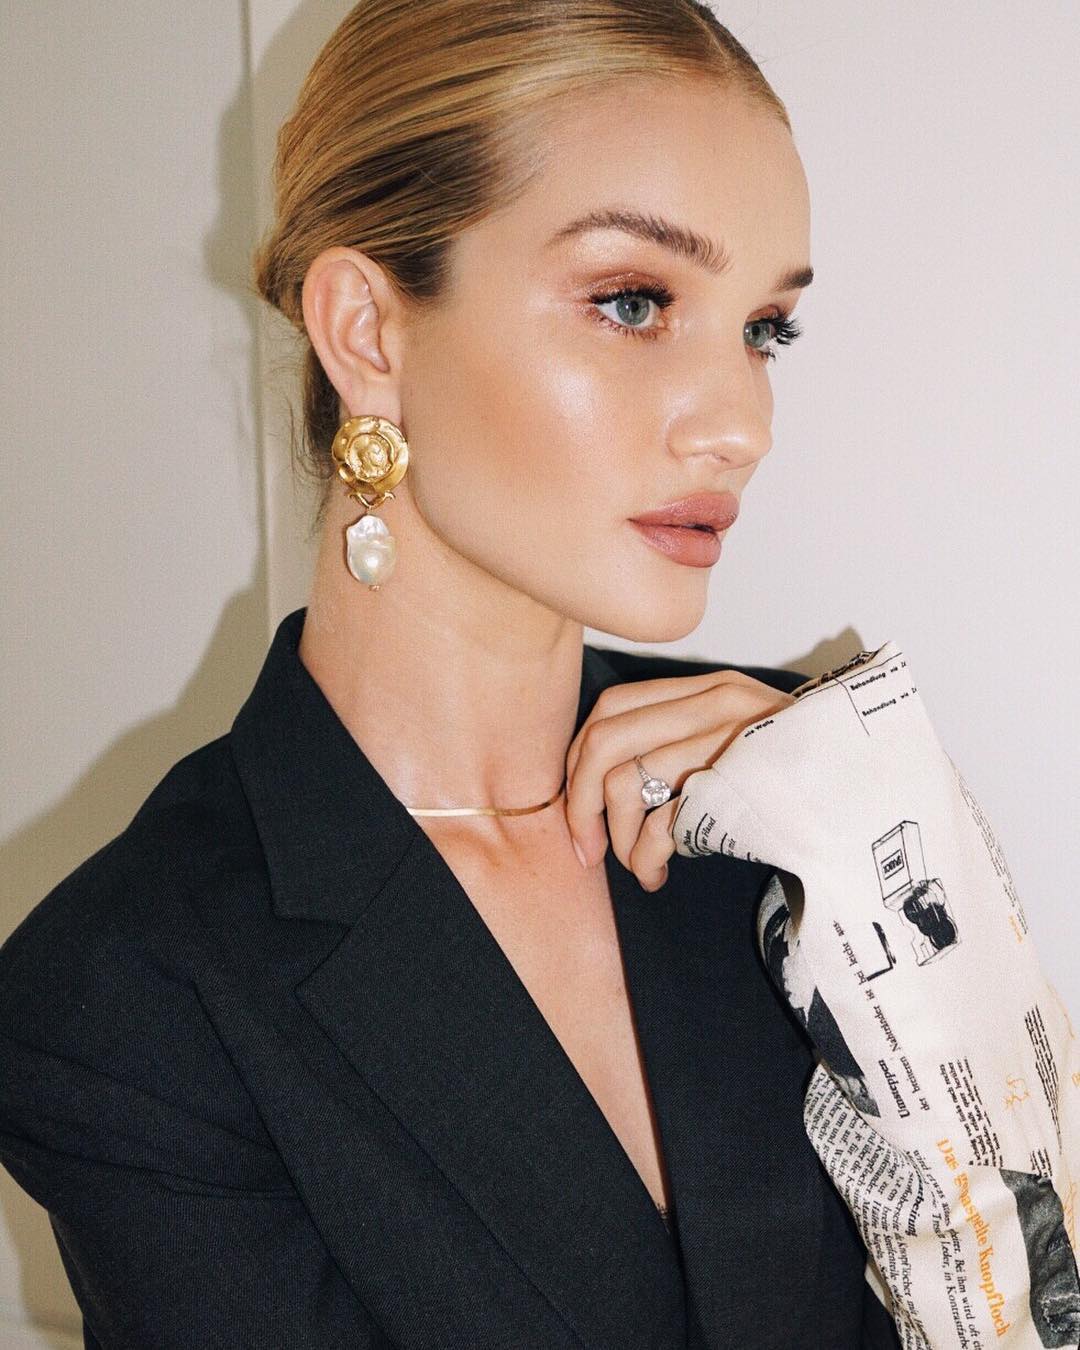 Thin Eyebrow Trend: Rosie Huntington-Whiteley with full brows and glowy skin